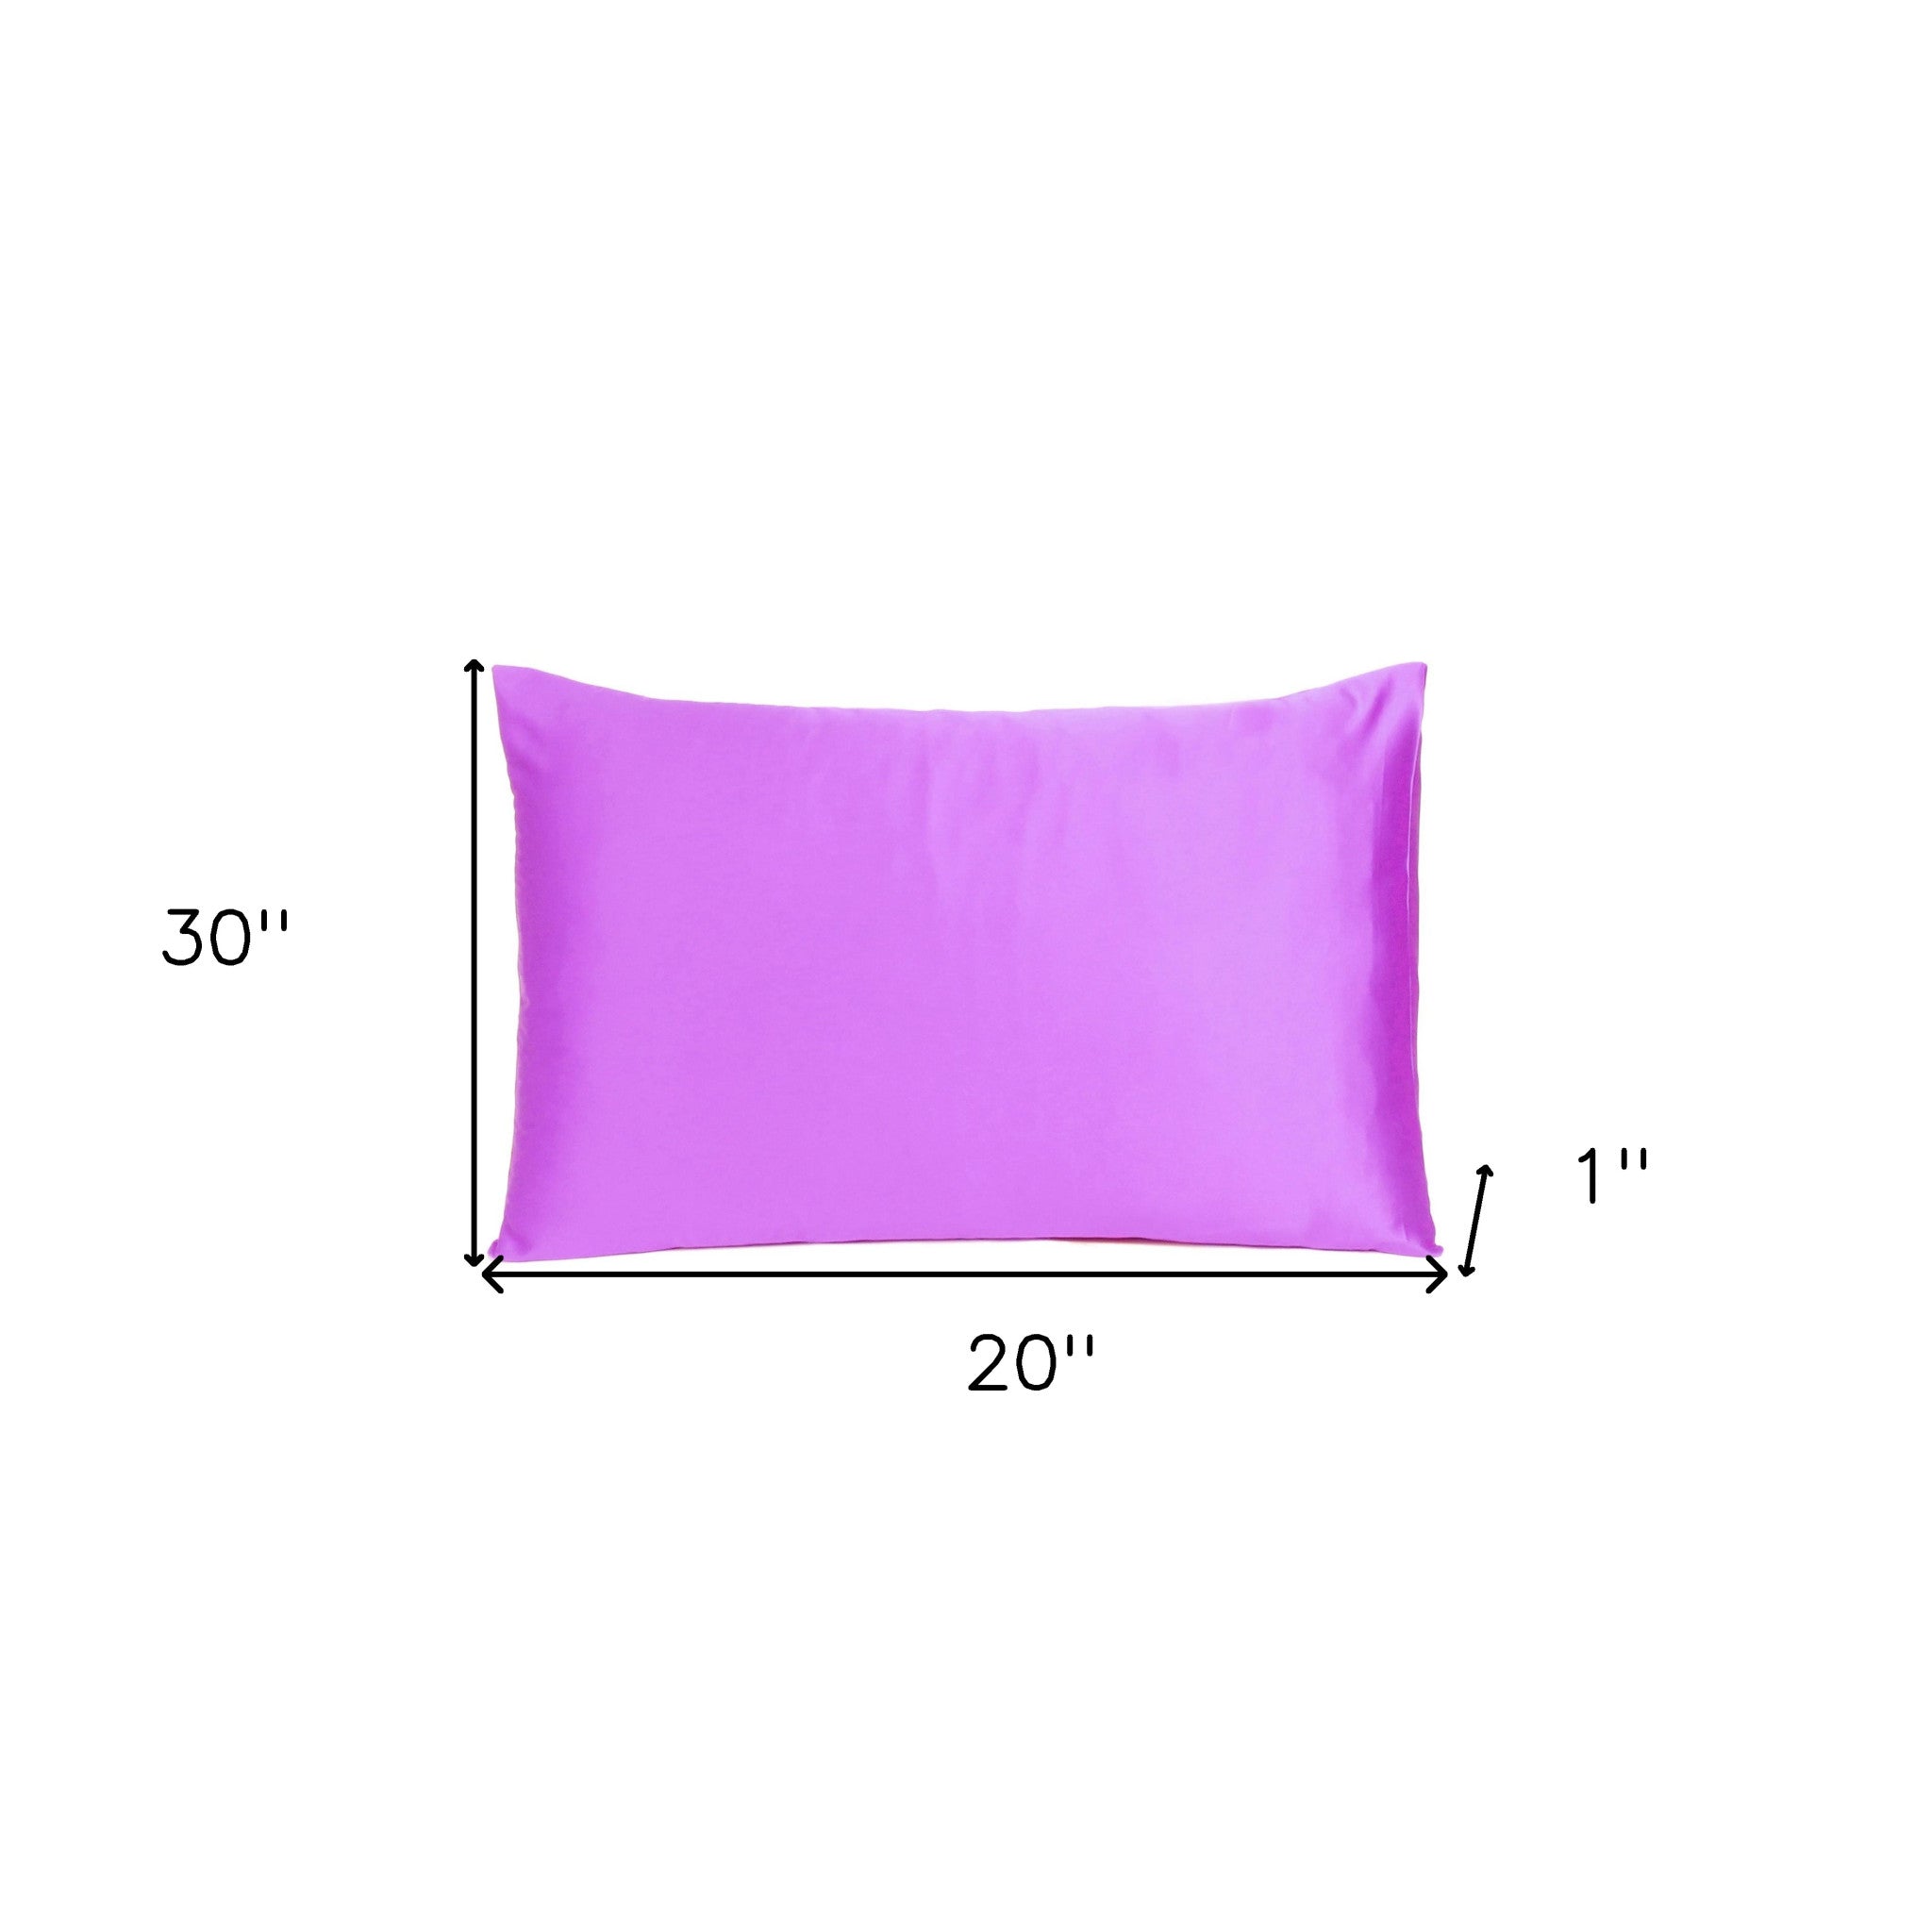 Violet Dreamy Set Of 2 Silky Satin Queen Pillowcases